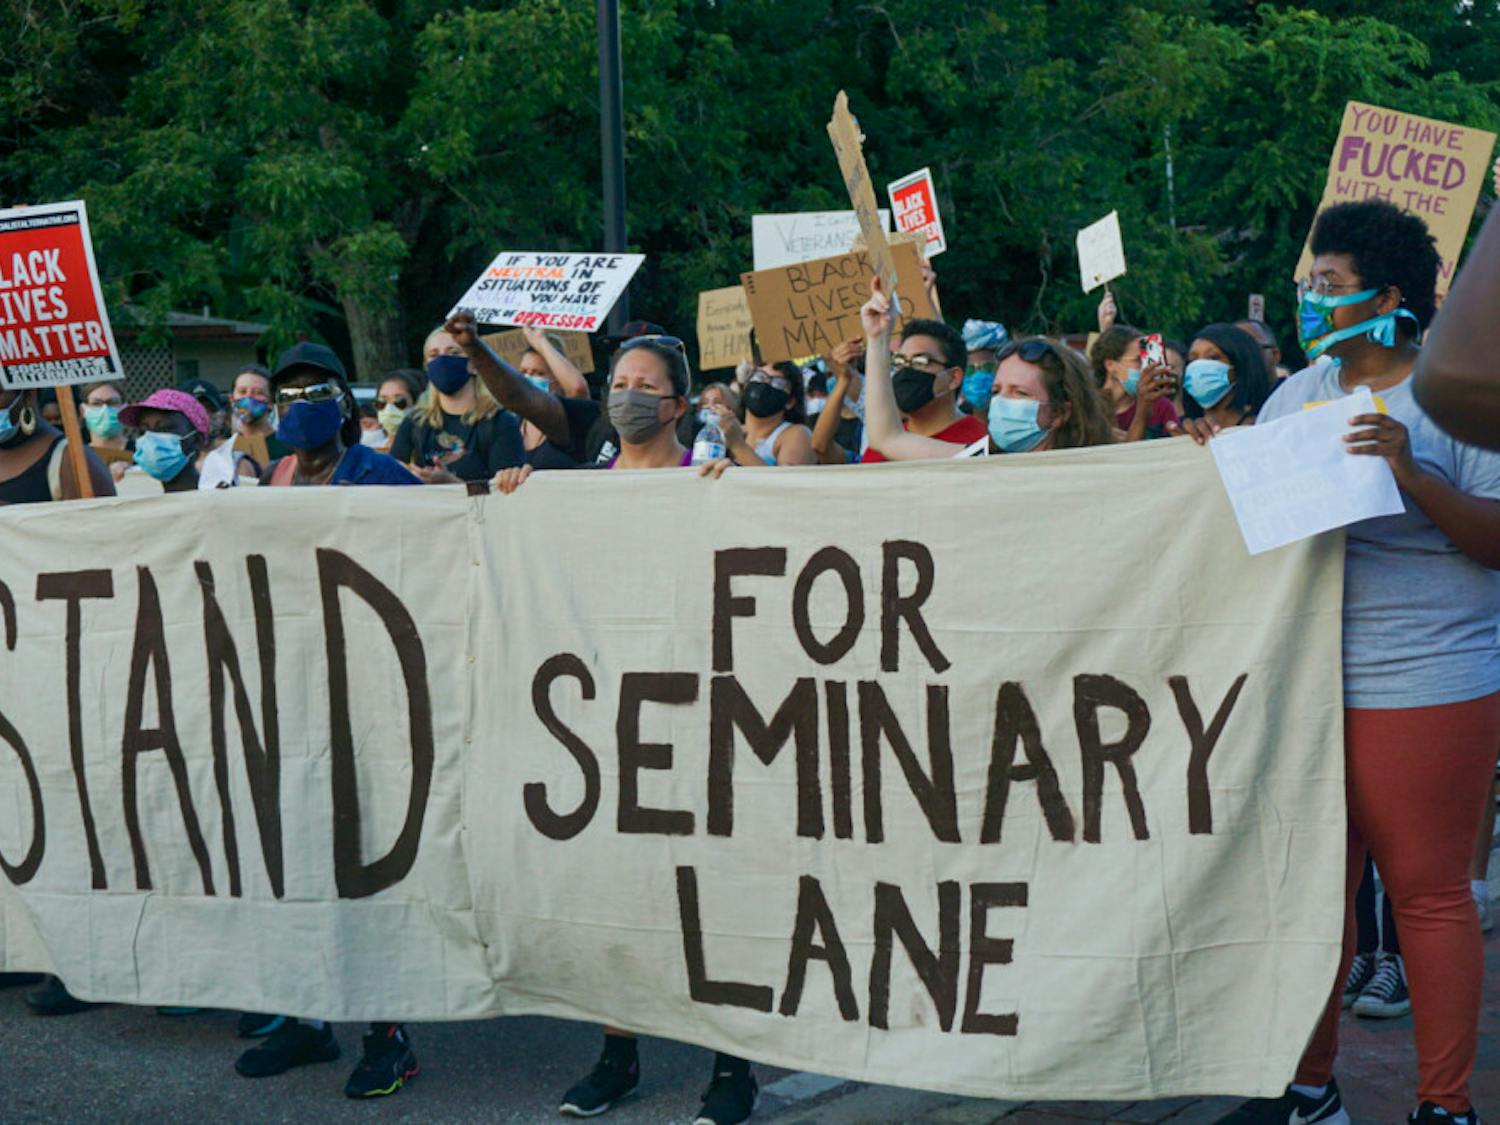 Protesters hold a banner that reads, "#StandForSeminaryLane," demanding that developers refrain from building luxury student apartments on land located in a historically Black community.
&nbsp;